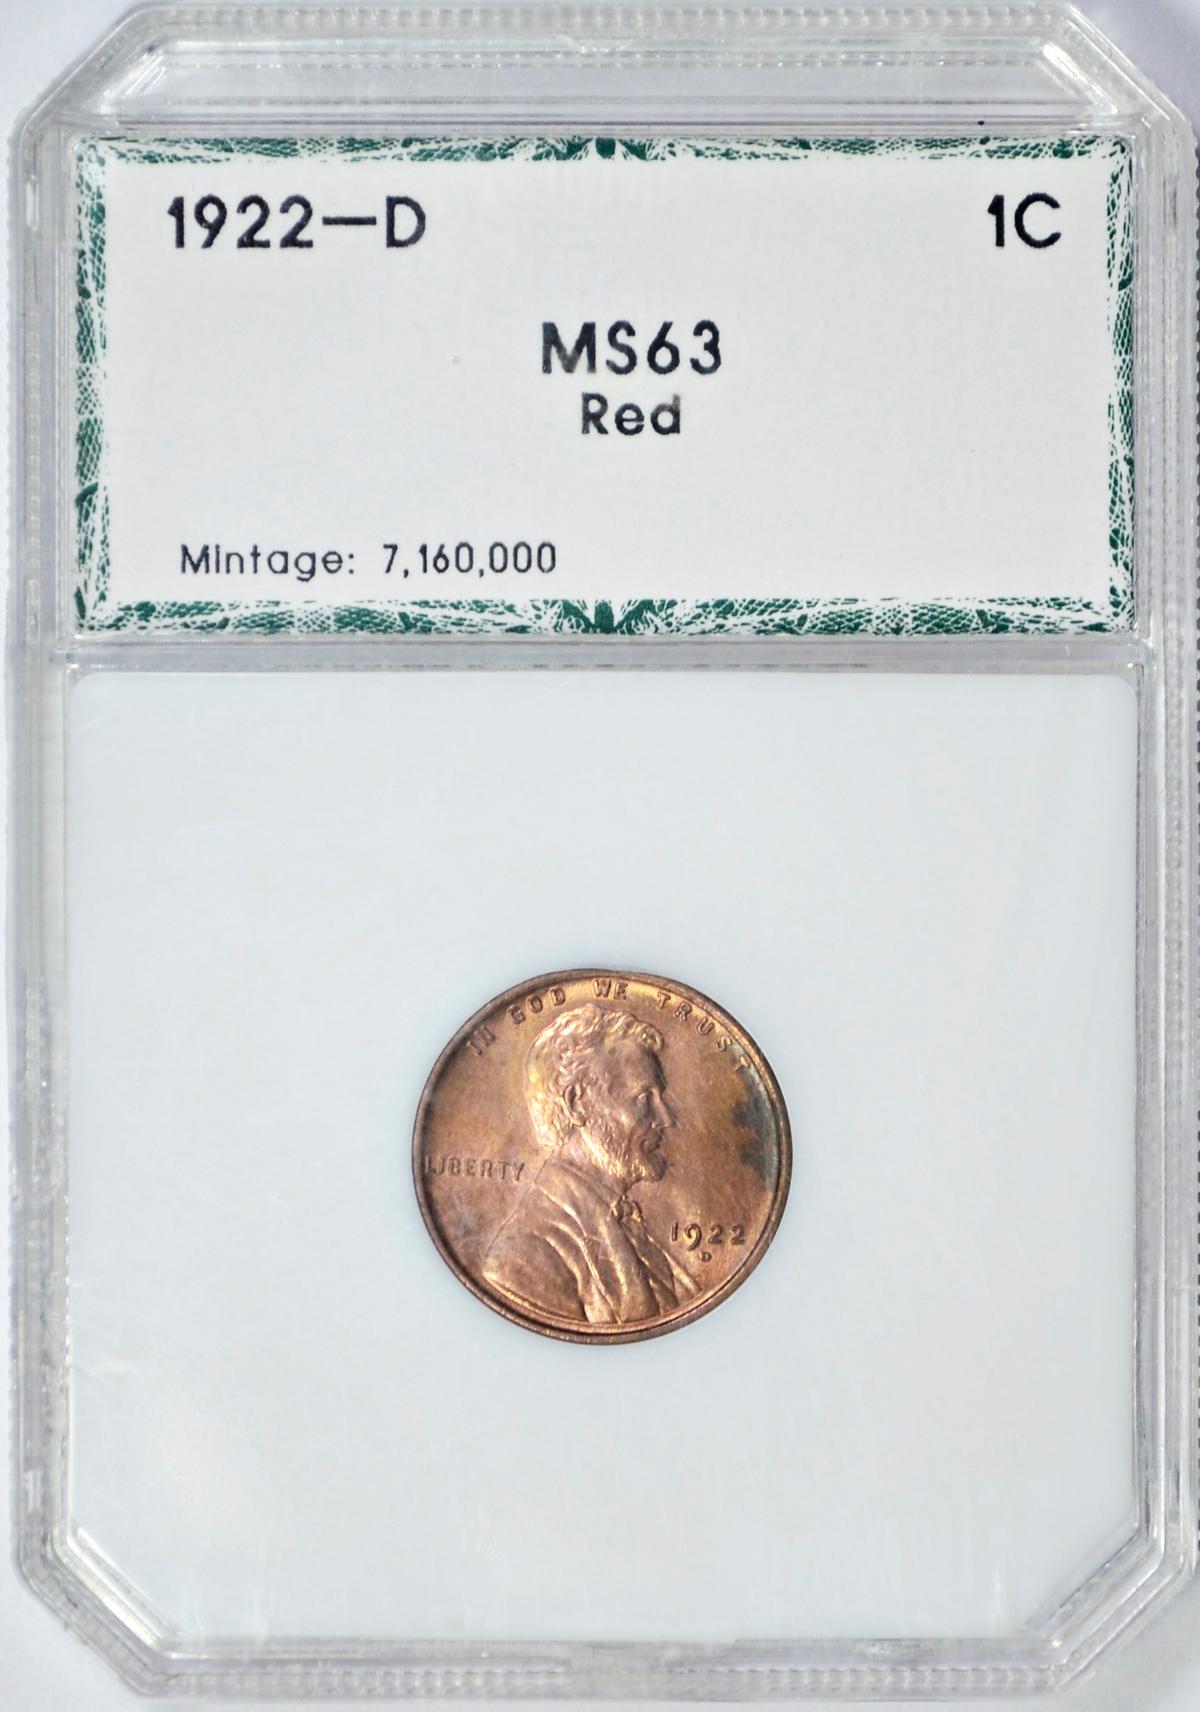 1922-D LINCOLN CENT - PCI MS63 RED